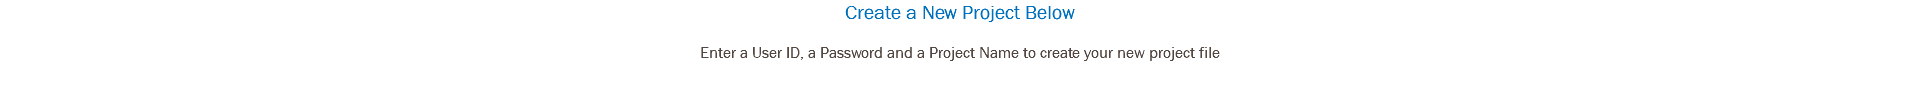 Create a New Project Below Enter a User ID, a Password and a Project Name to create your new project file